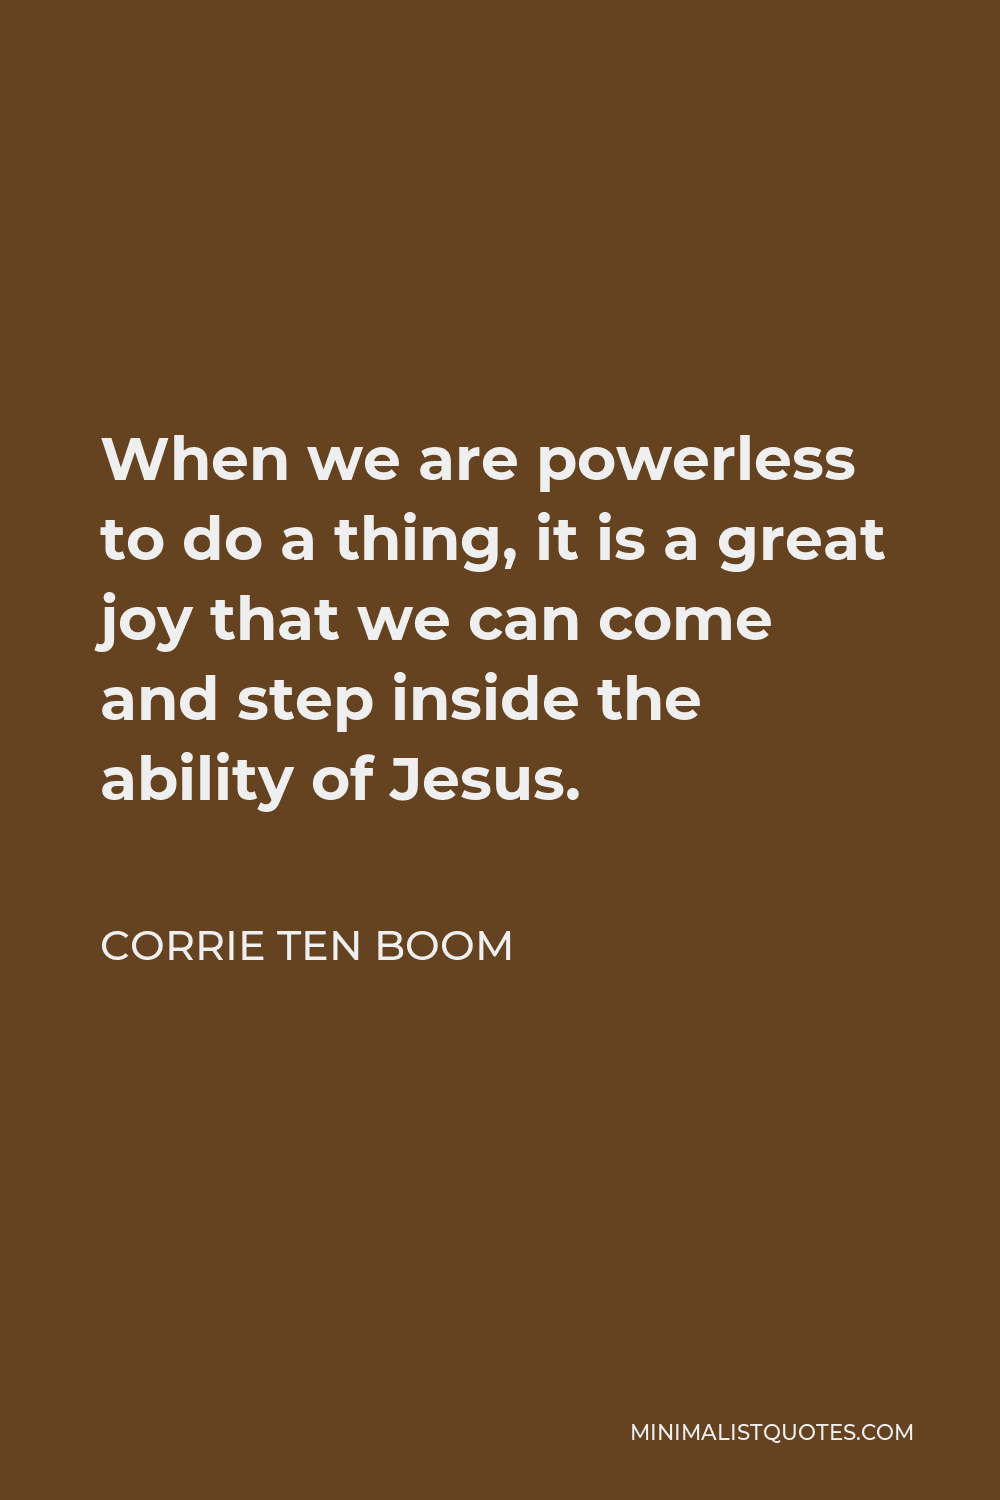 Corrie ten Boom Quote - When we are powerless to do a thing, it is a great joy that we can come and step inside the ability of Jesus.